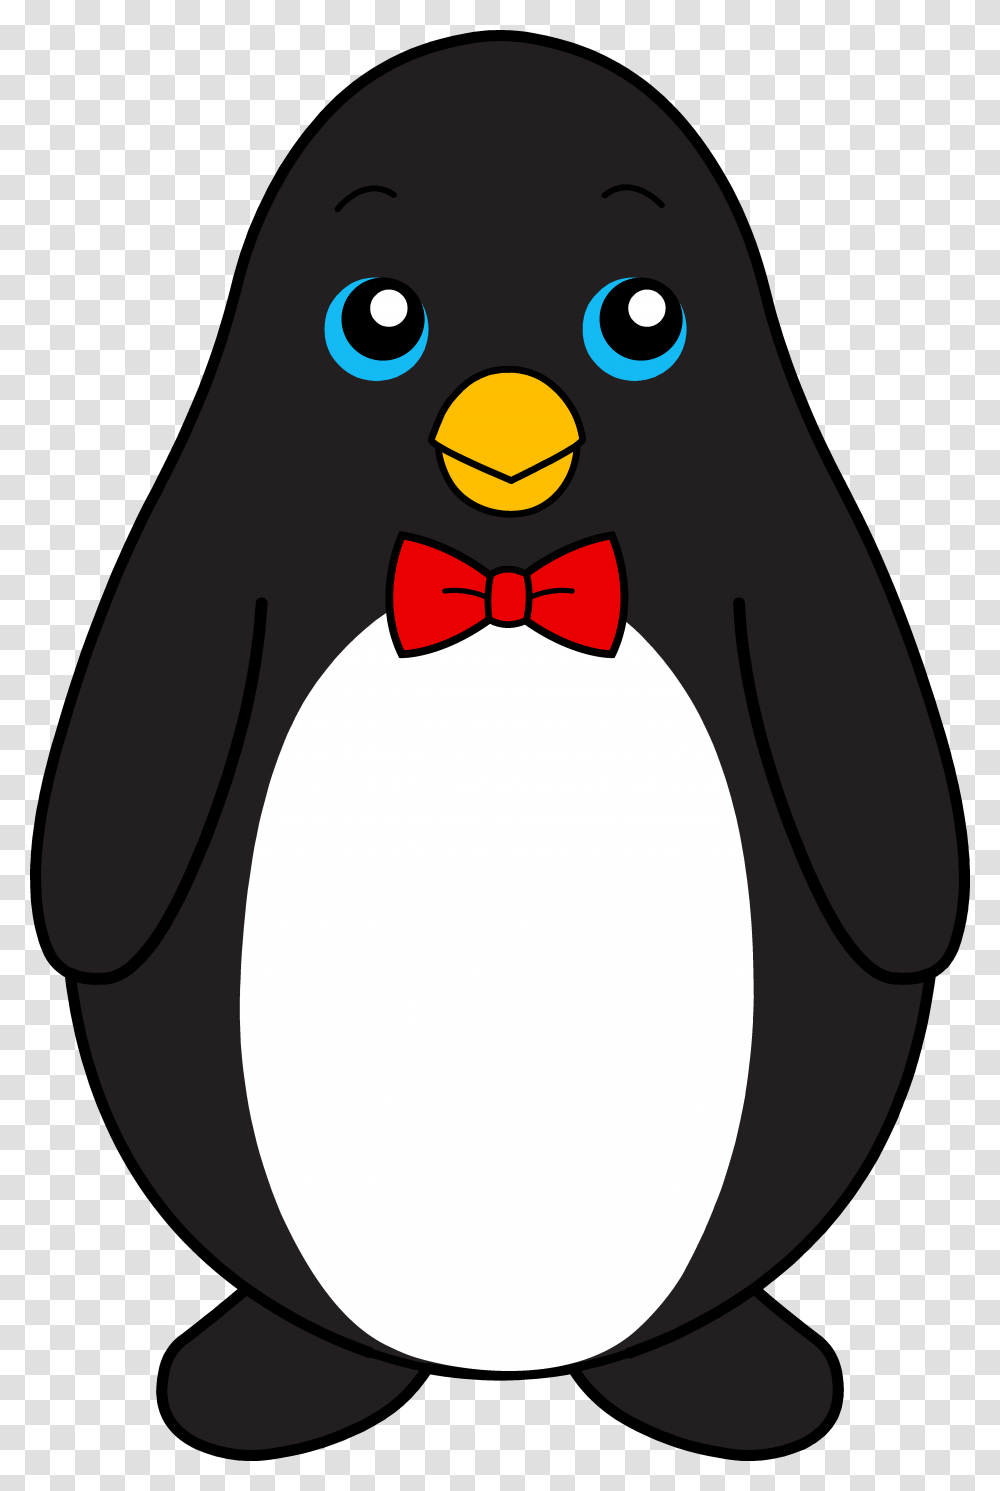 Holiday Holidays Clipart Tie For Free And Use In Presentations Penguin With A Tie, Bird, Animal, King Penguin Transparent Png